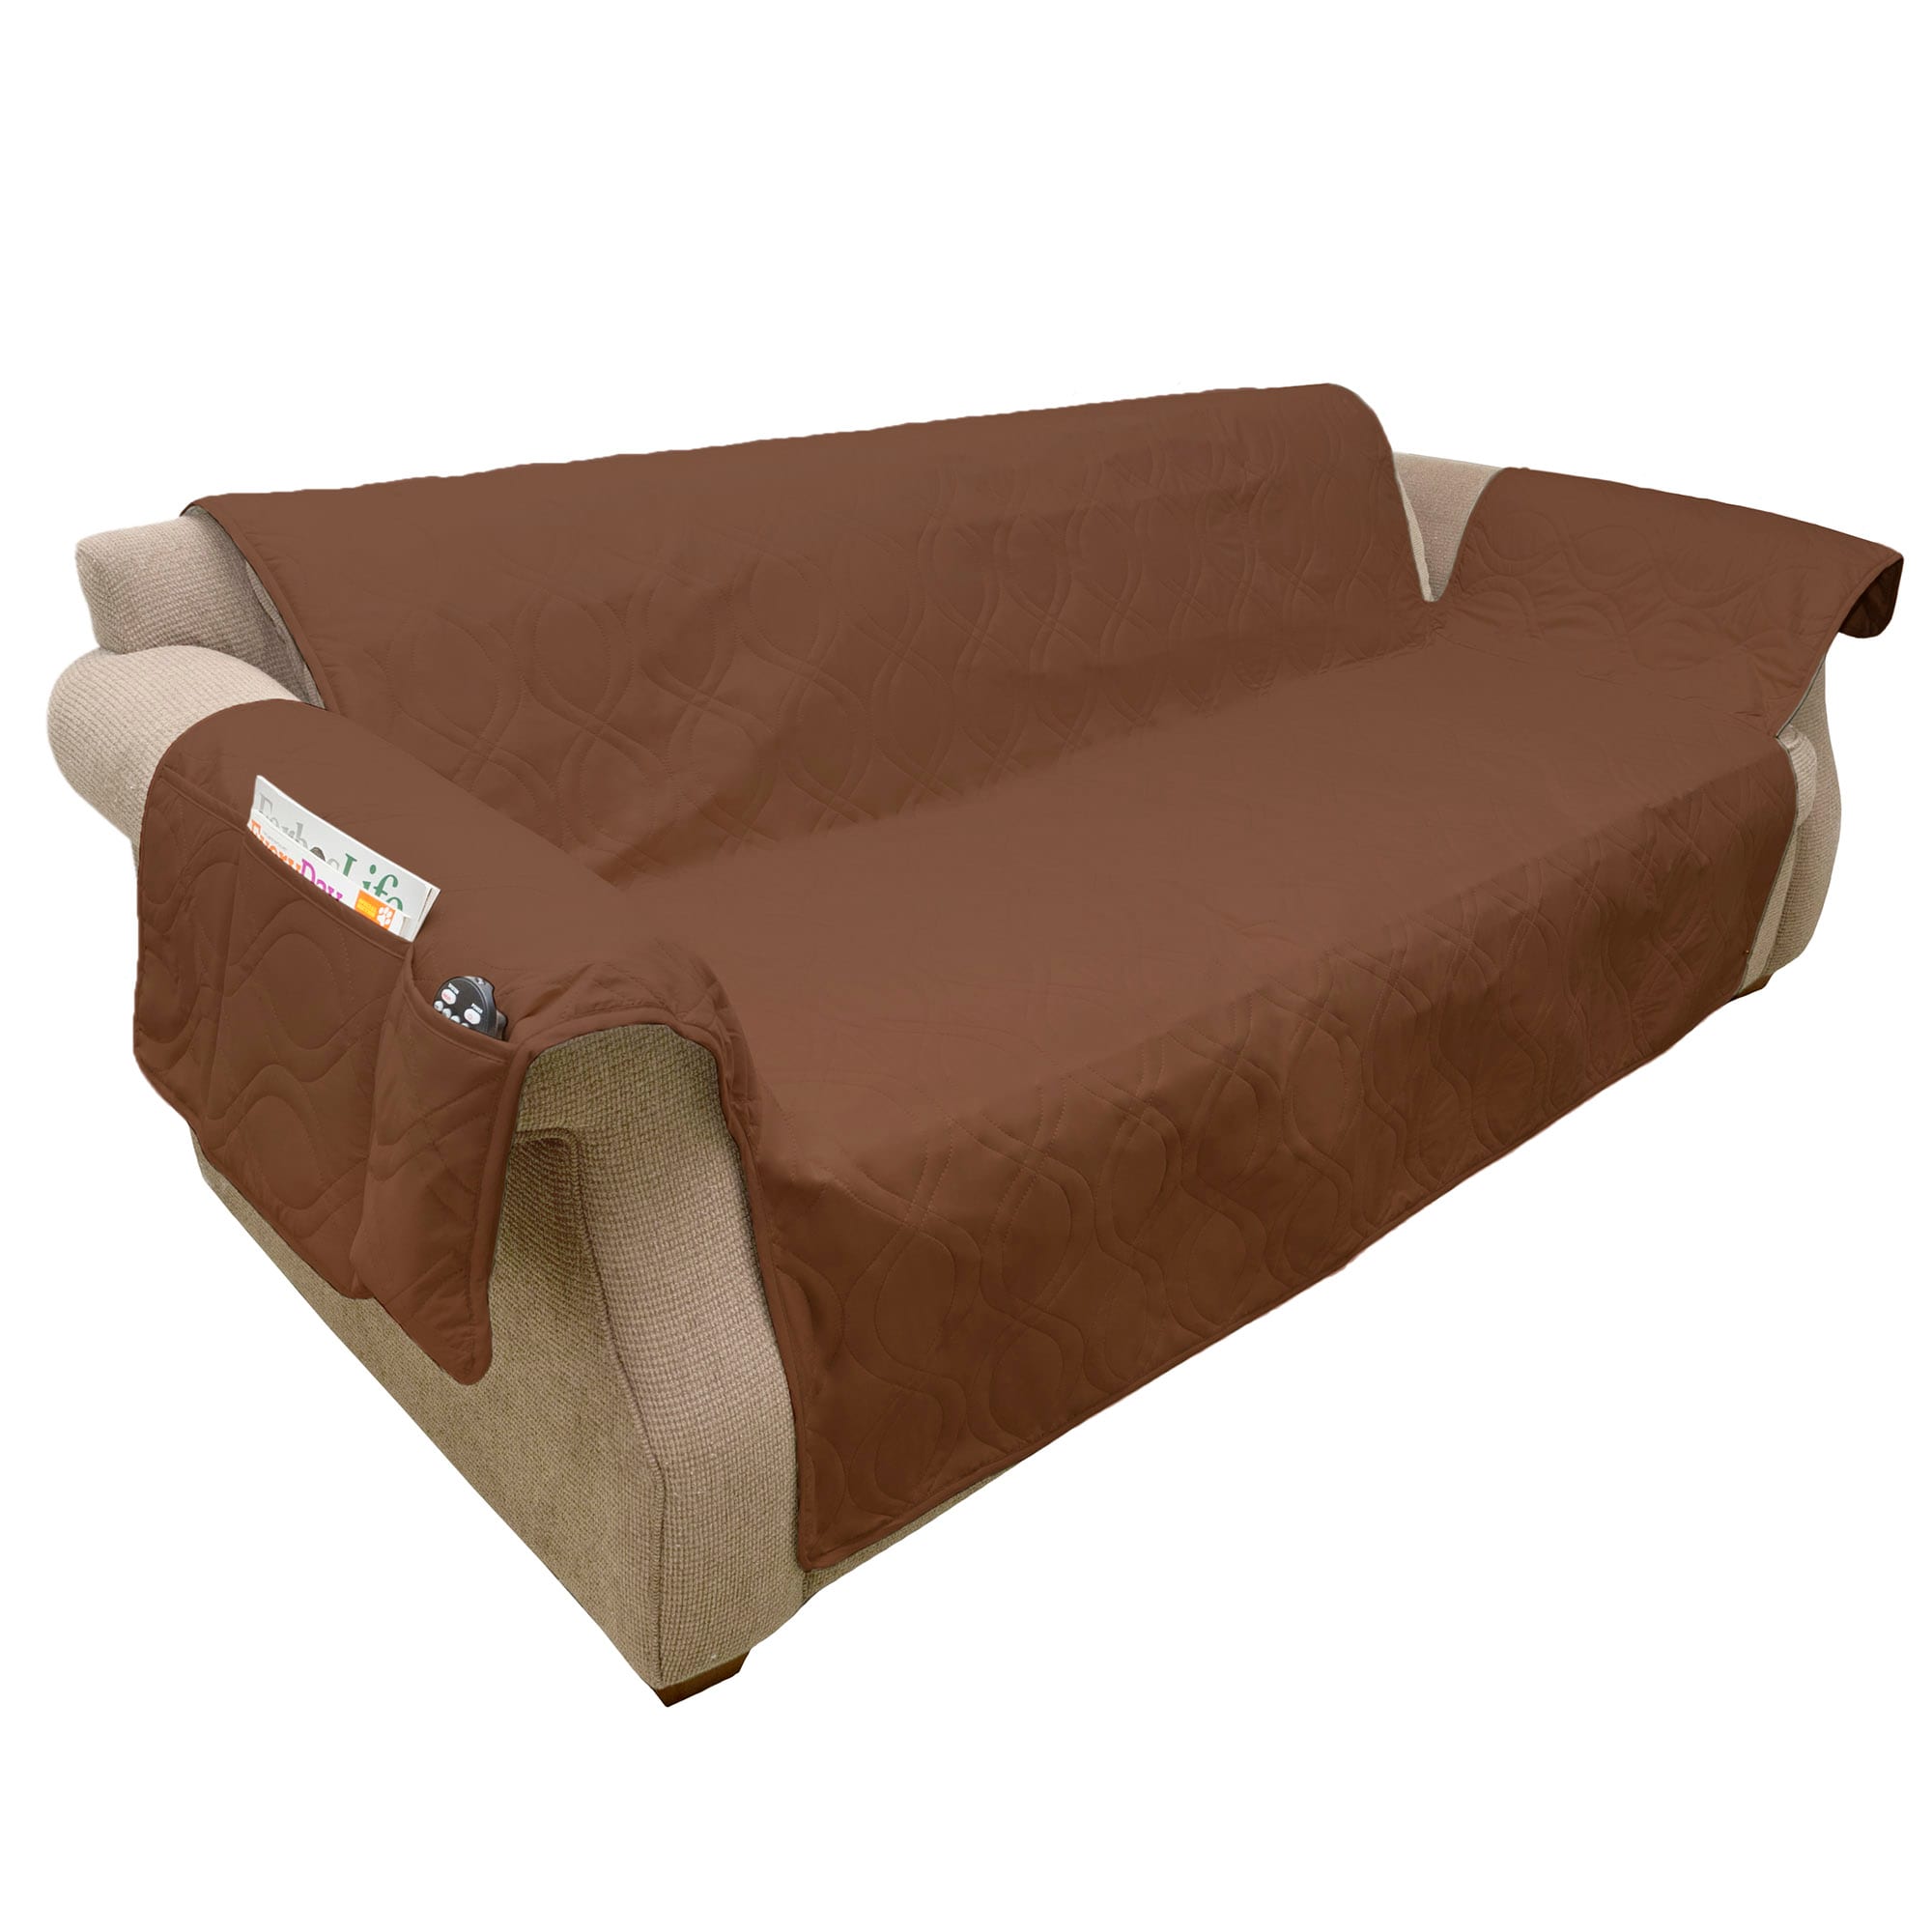 Featured image of post Brown Sofa Set Cover - Galaxy leaf sb brown sofa covers.